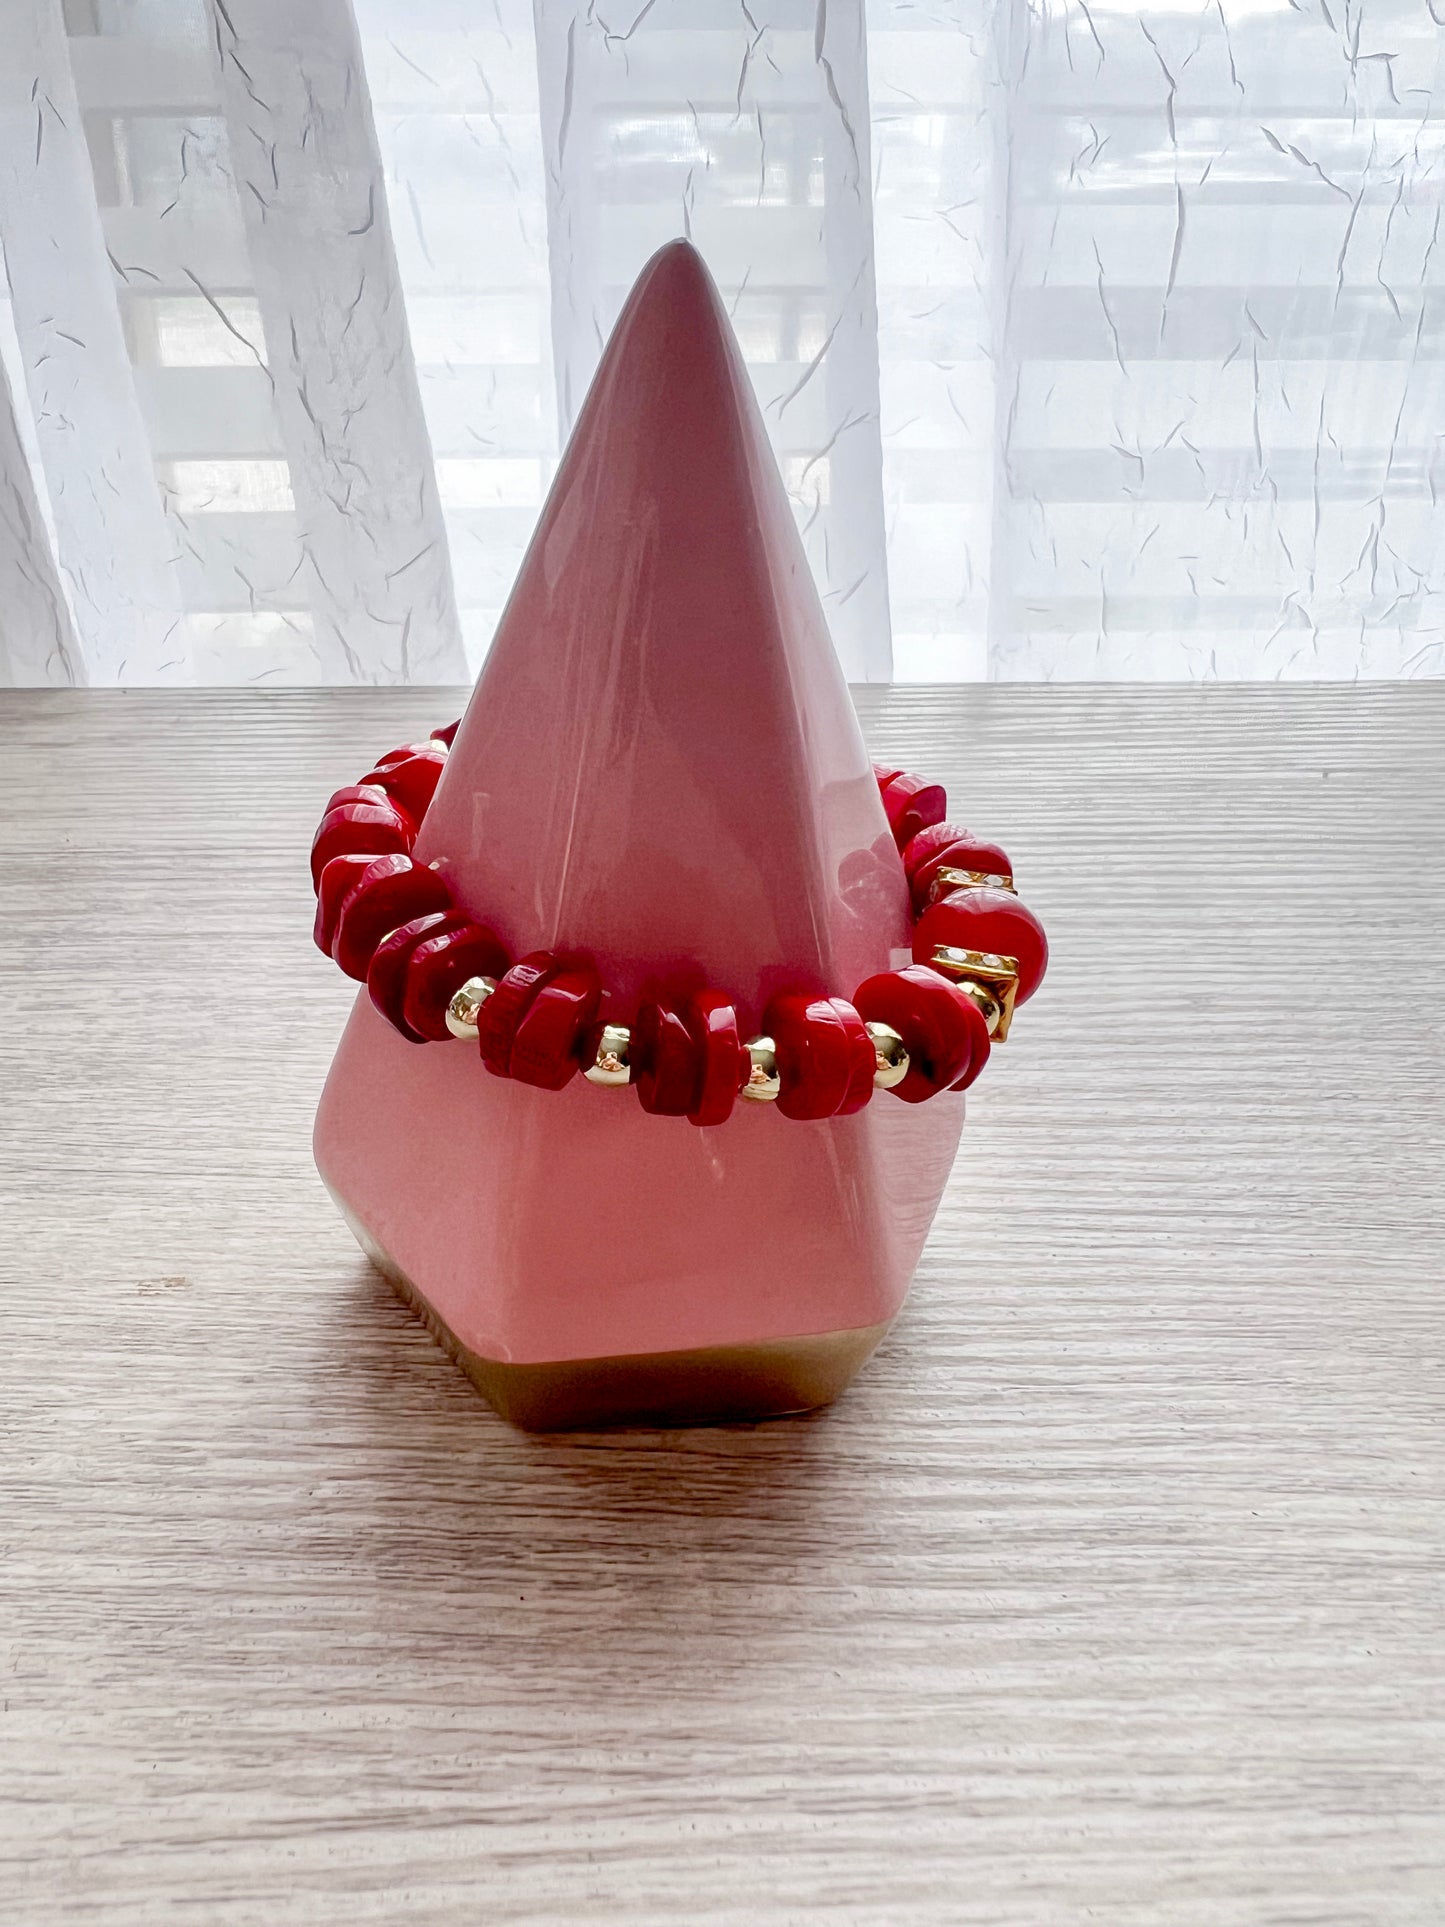 Red and Gold Beaded Bracelet